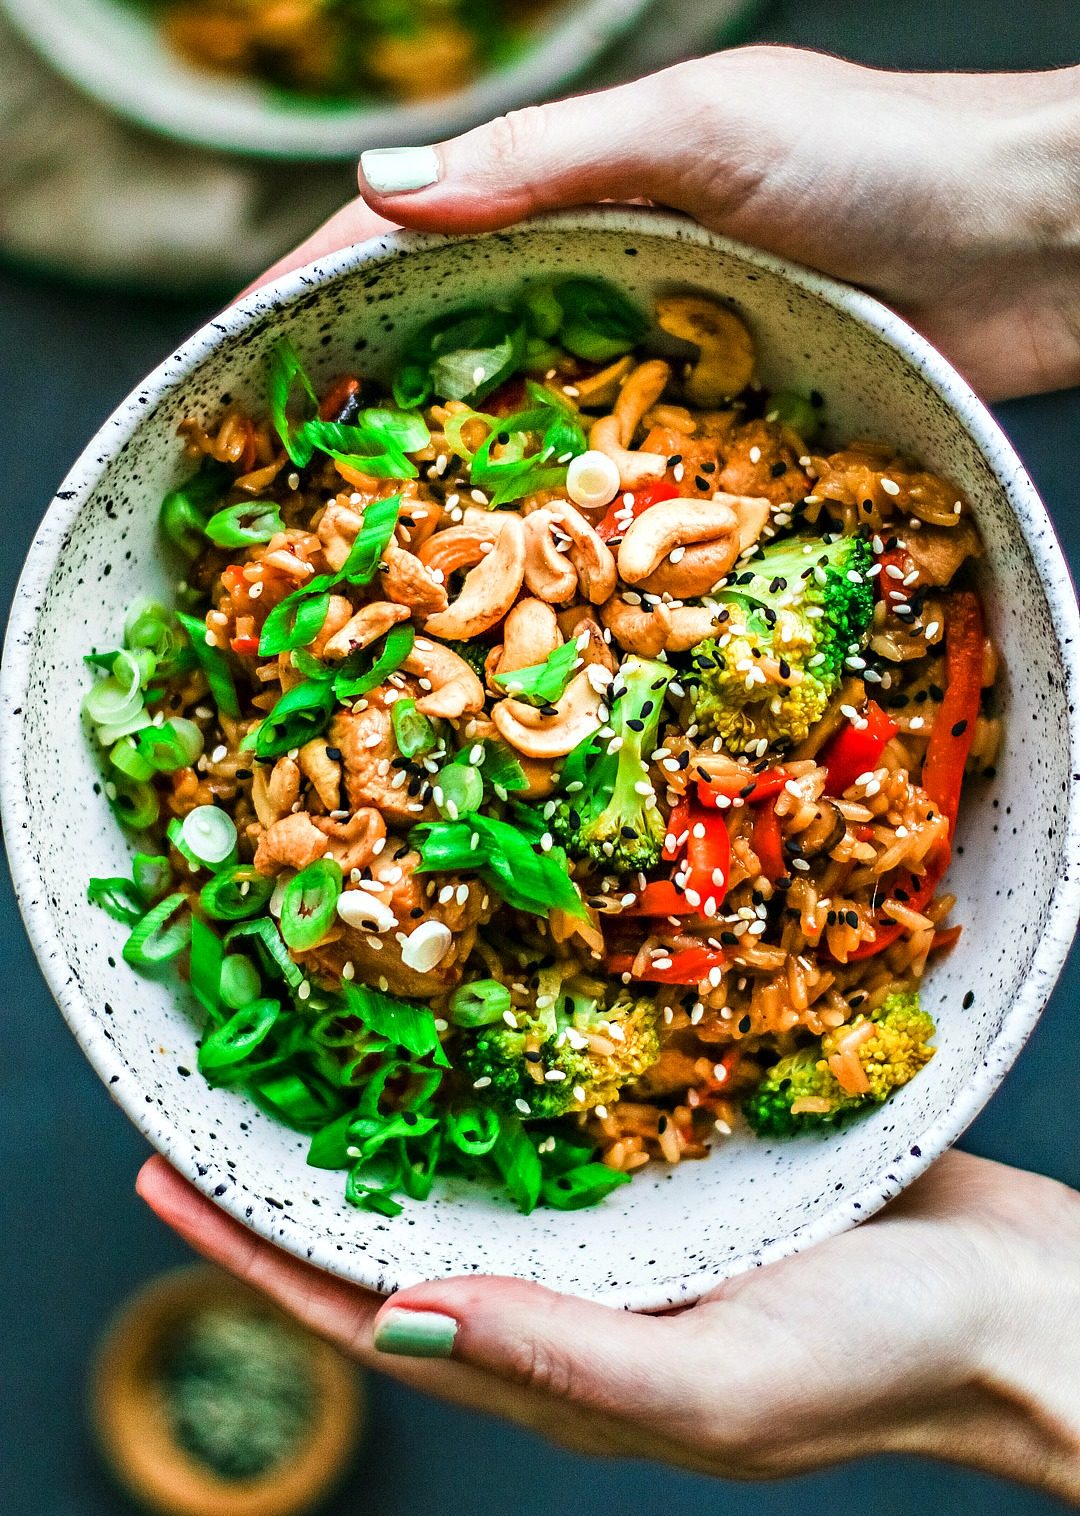 Hands holding bowl of Honey Garlic Chicken and Rice, loaded with veggies and cashews.